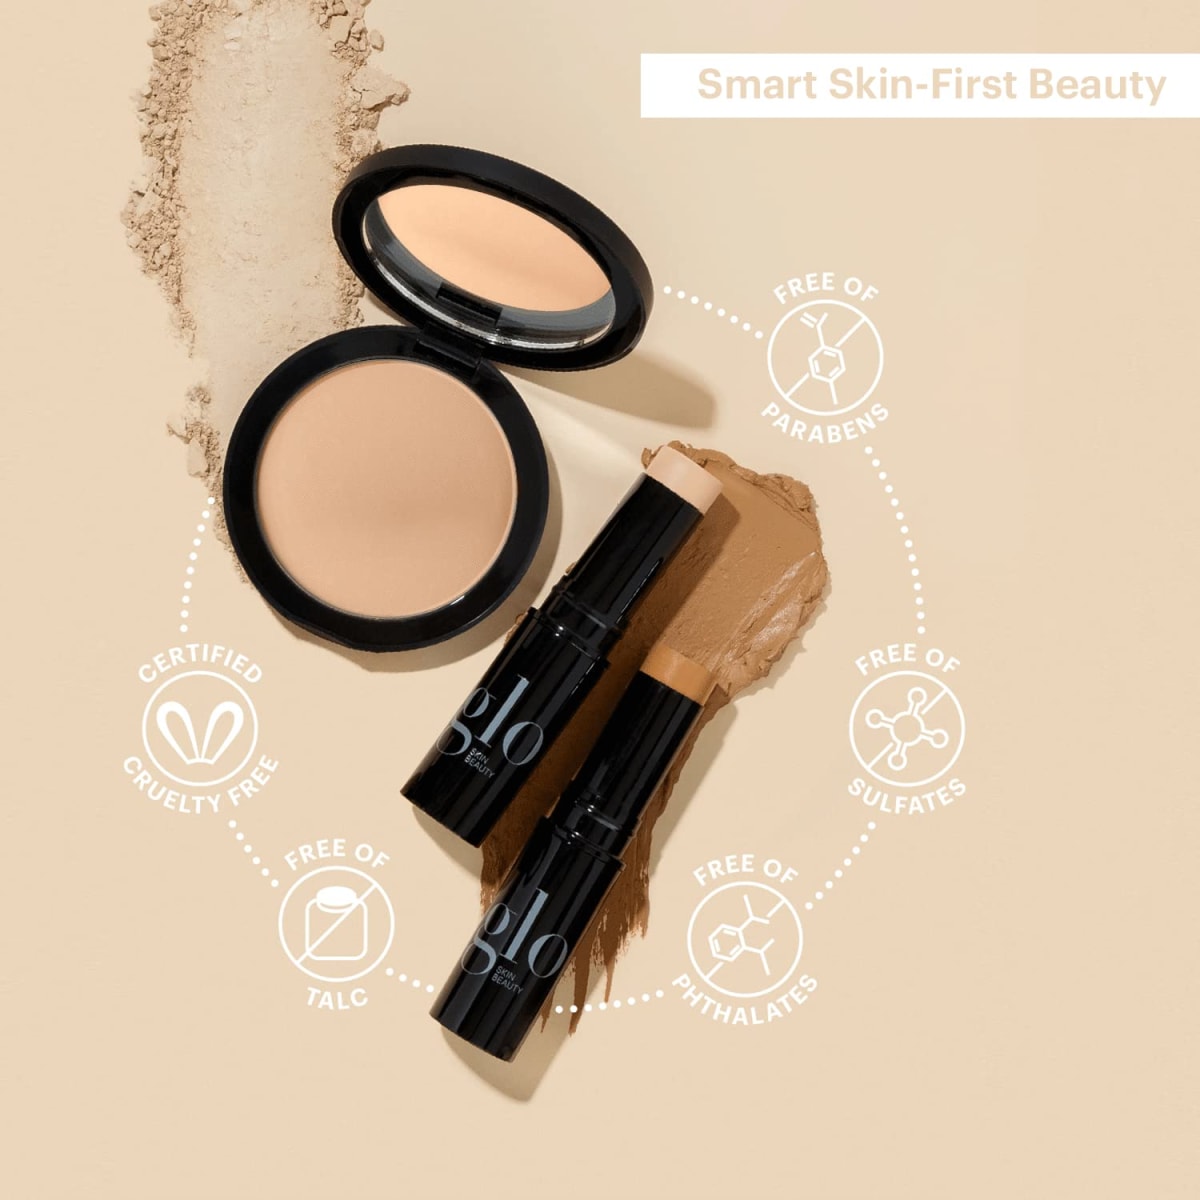 Pressed Base | Flexible, Weightless, Longwearing Coverage for A Radiant